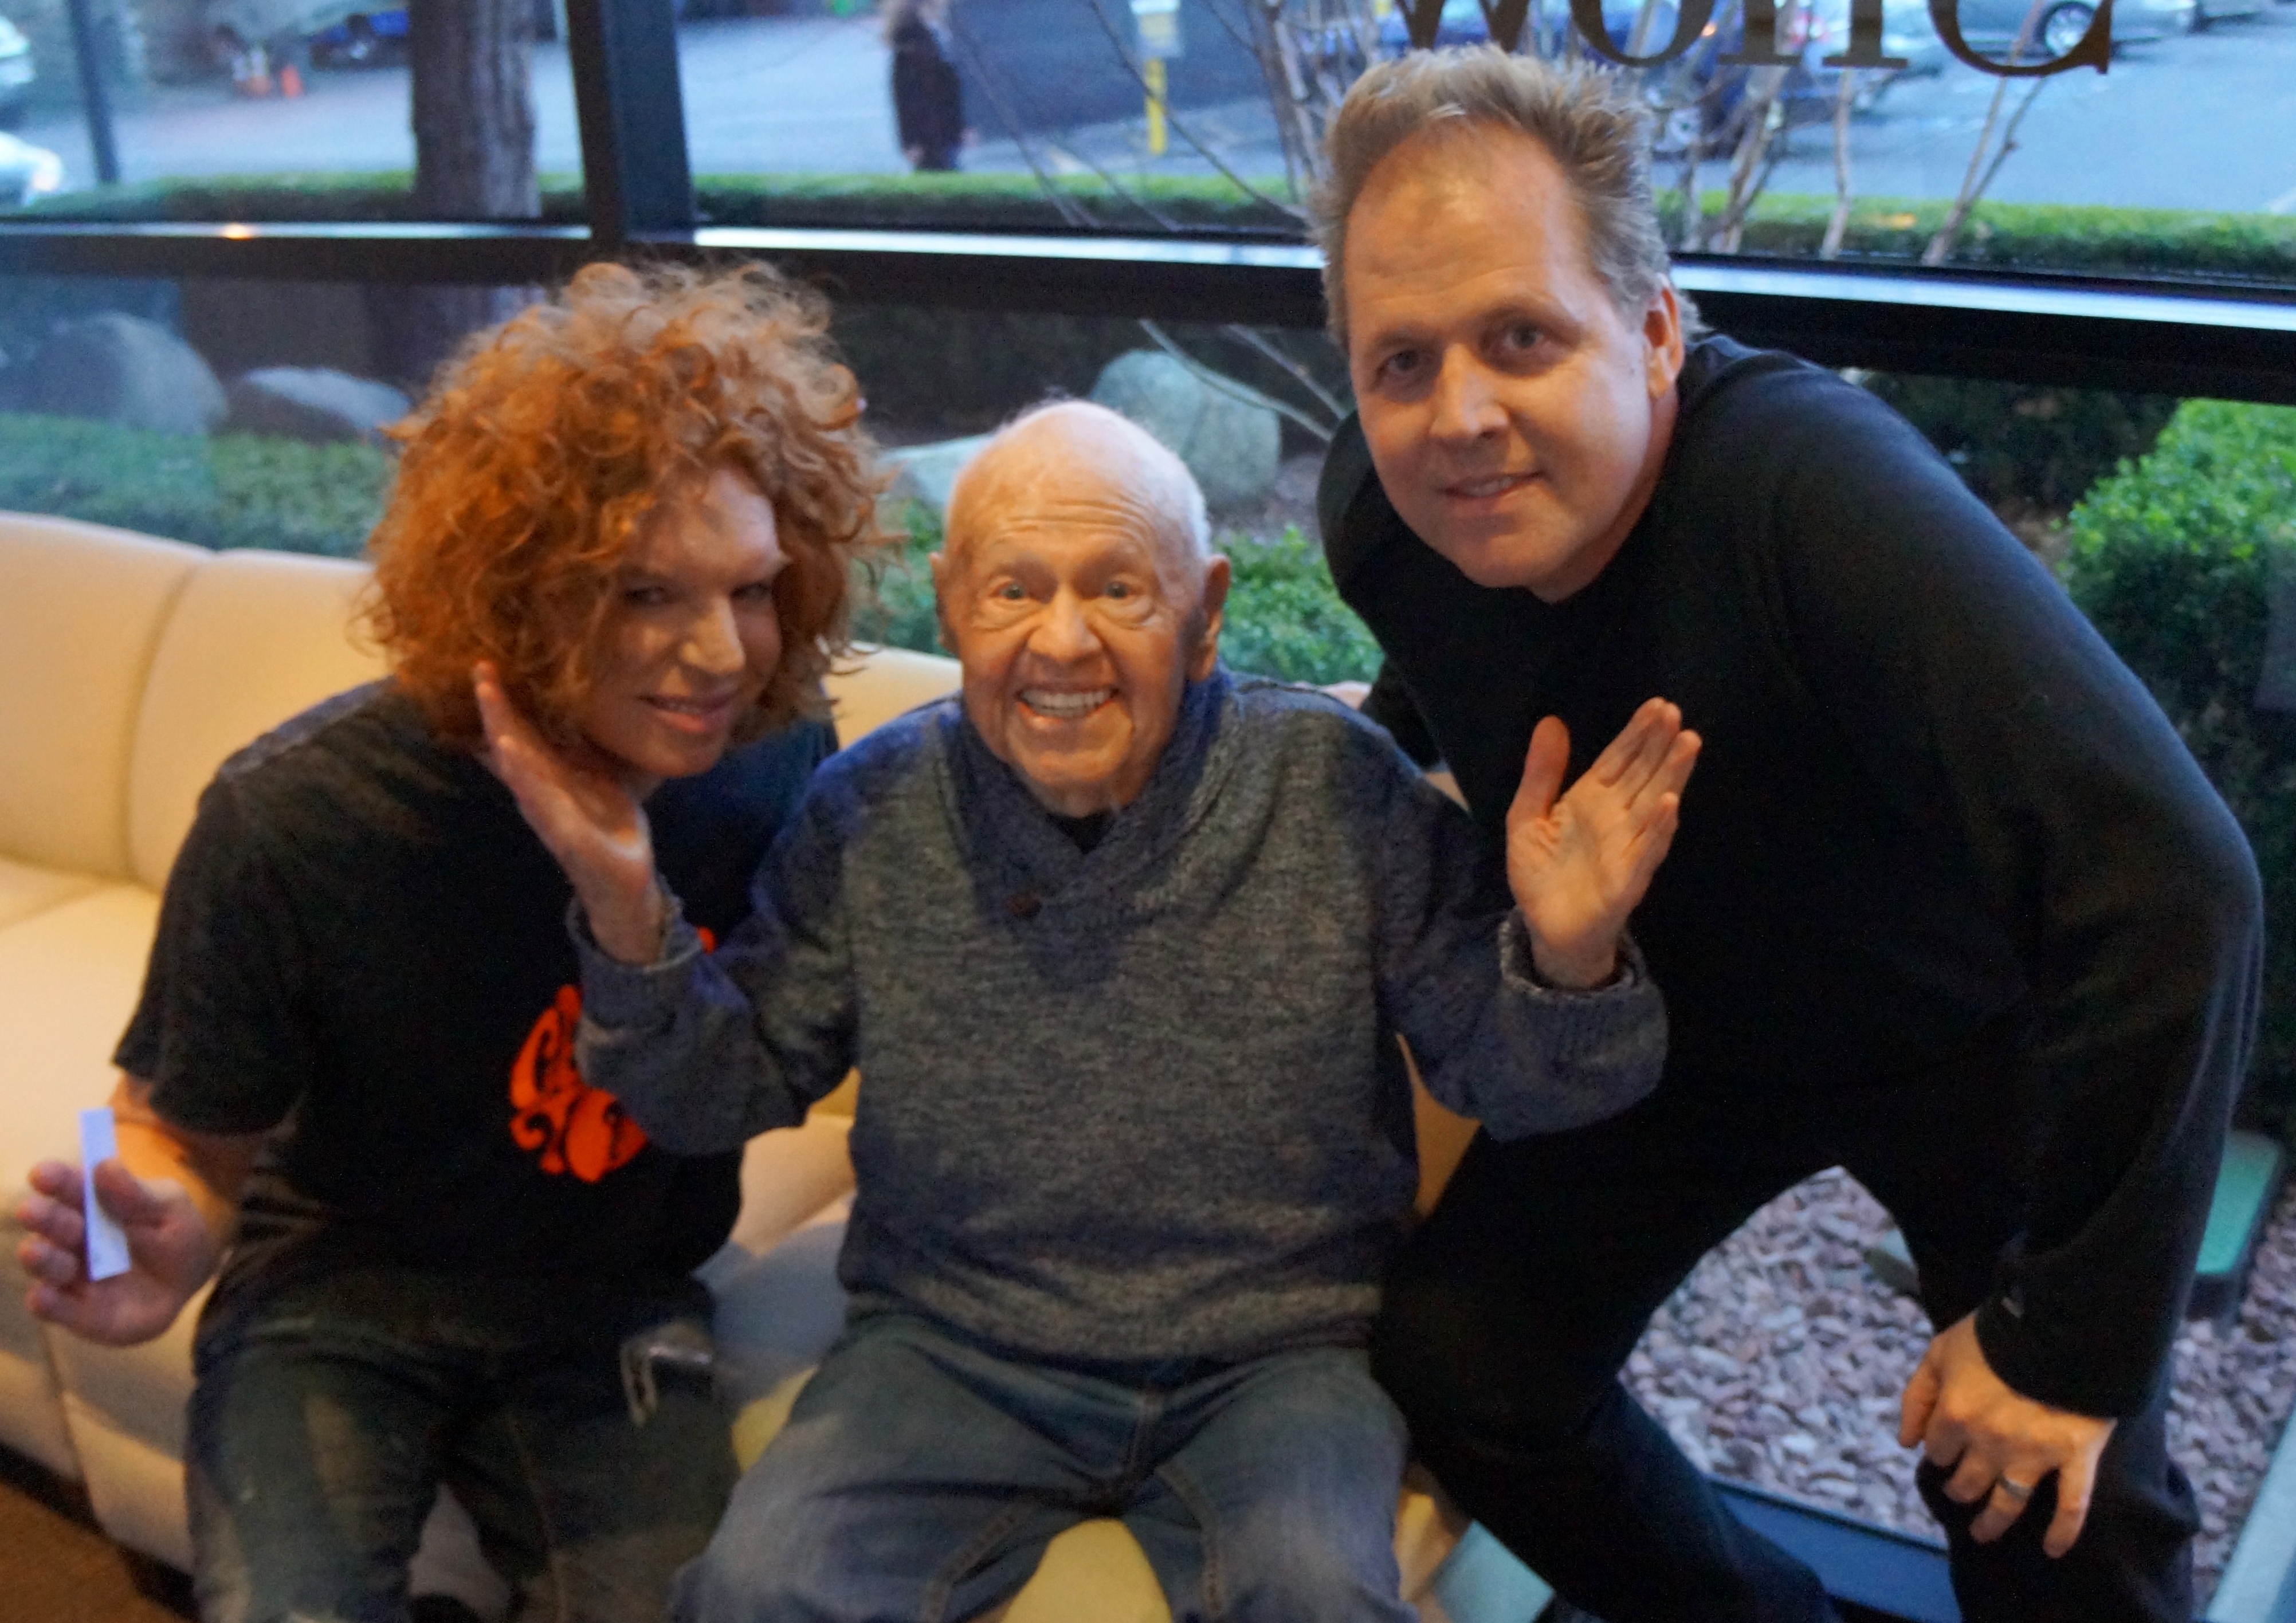 Mickey Rooney having fun with son Mark Rooney (r) and Carrot Top (l)